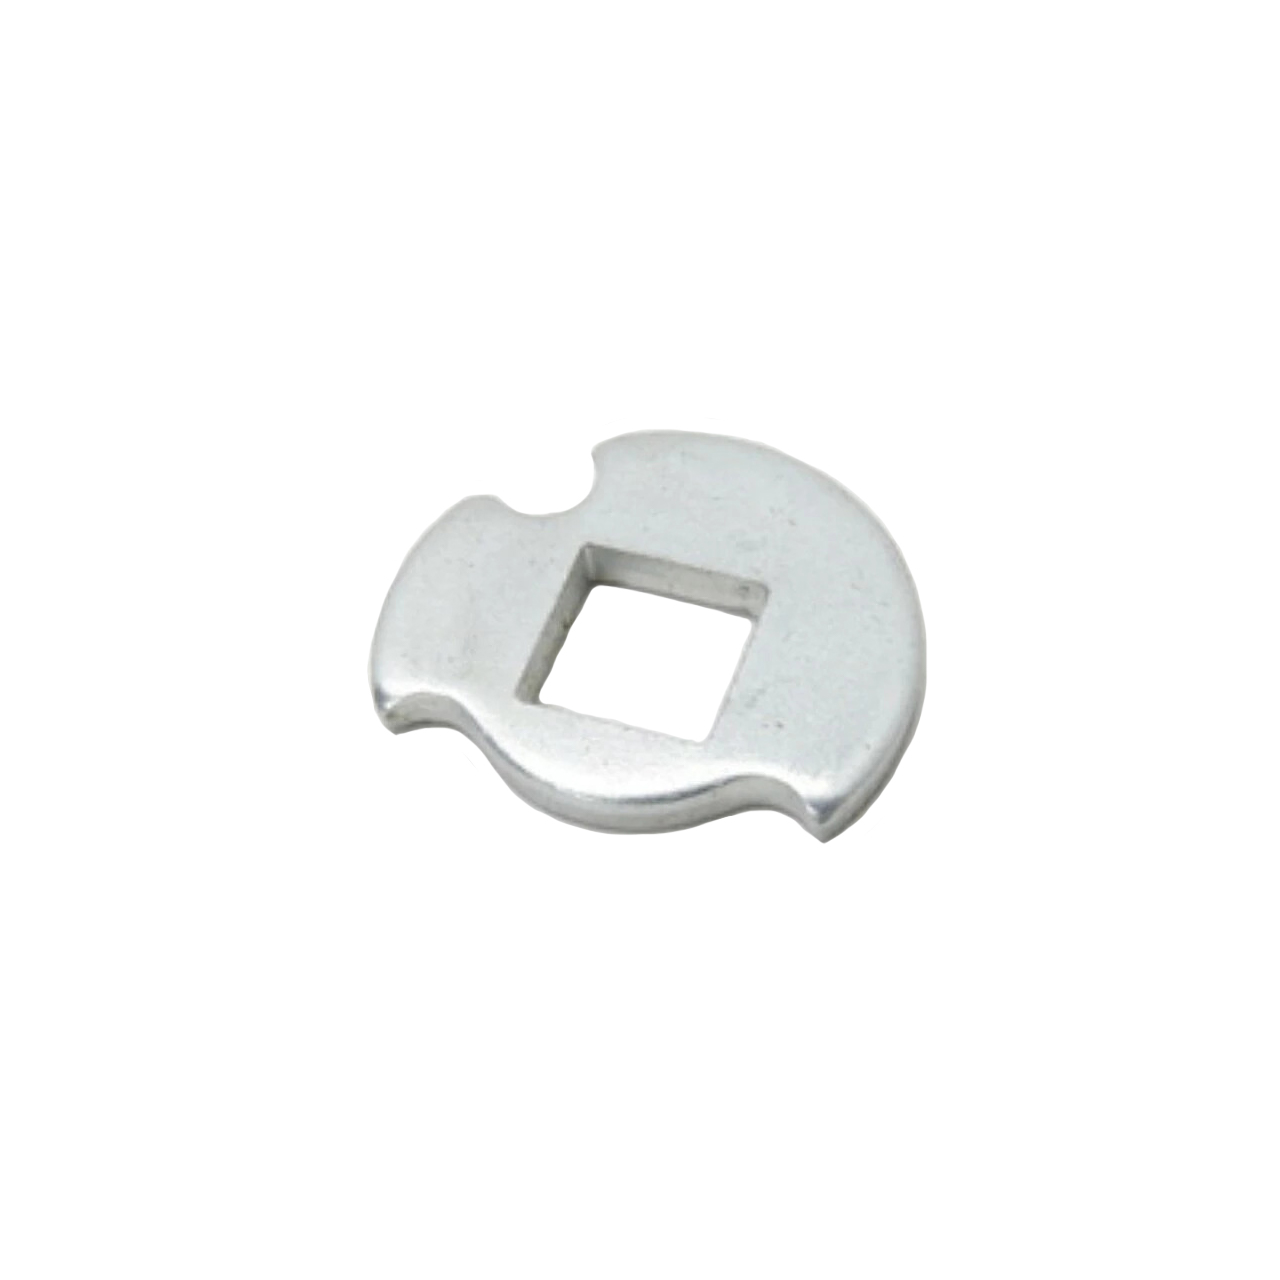 Spartan Tool Stop Washer - 73818900